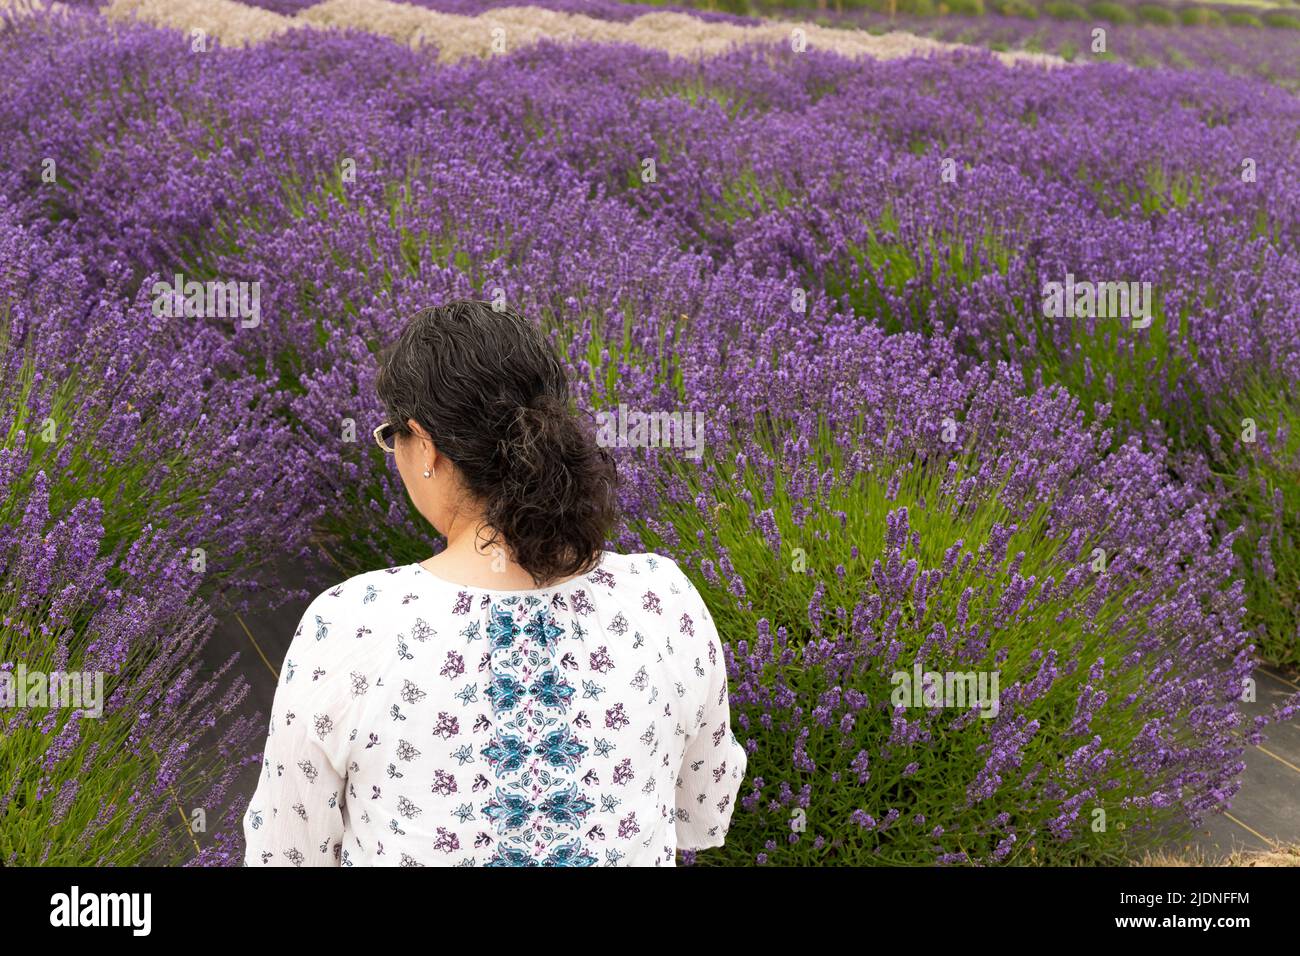 Woman with Dark Curly Hair Sitting in a Purple Lavender Field Stock Photo